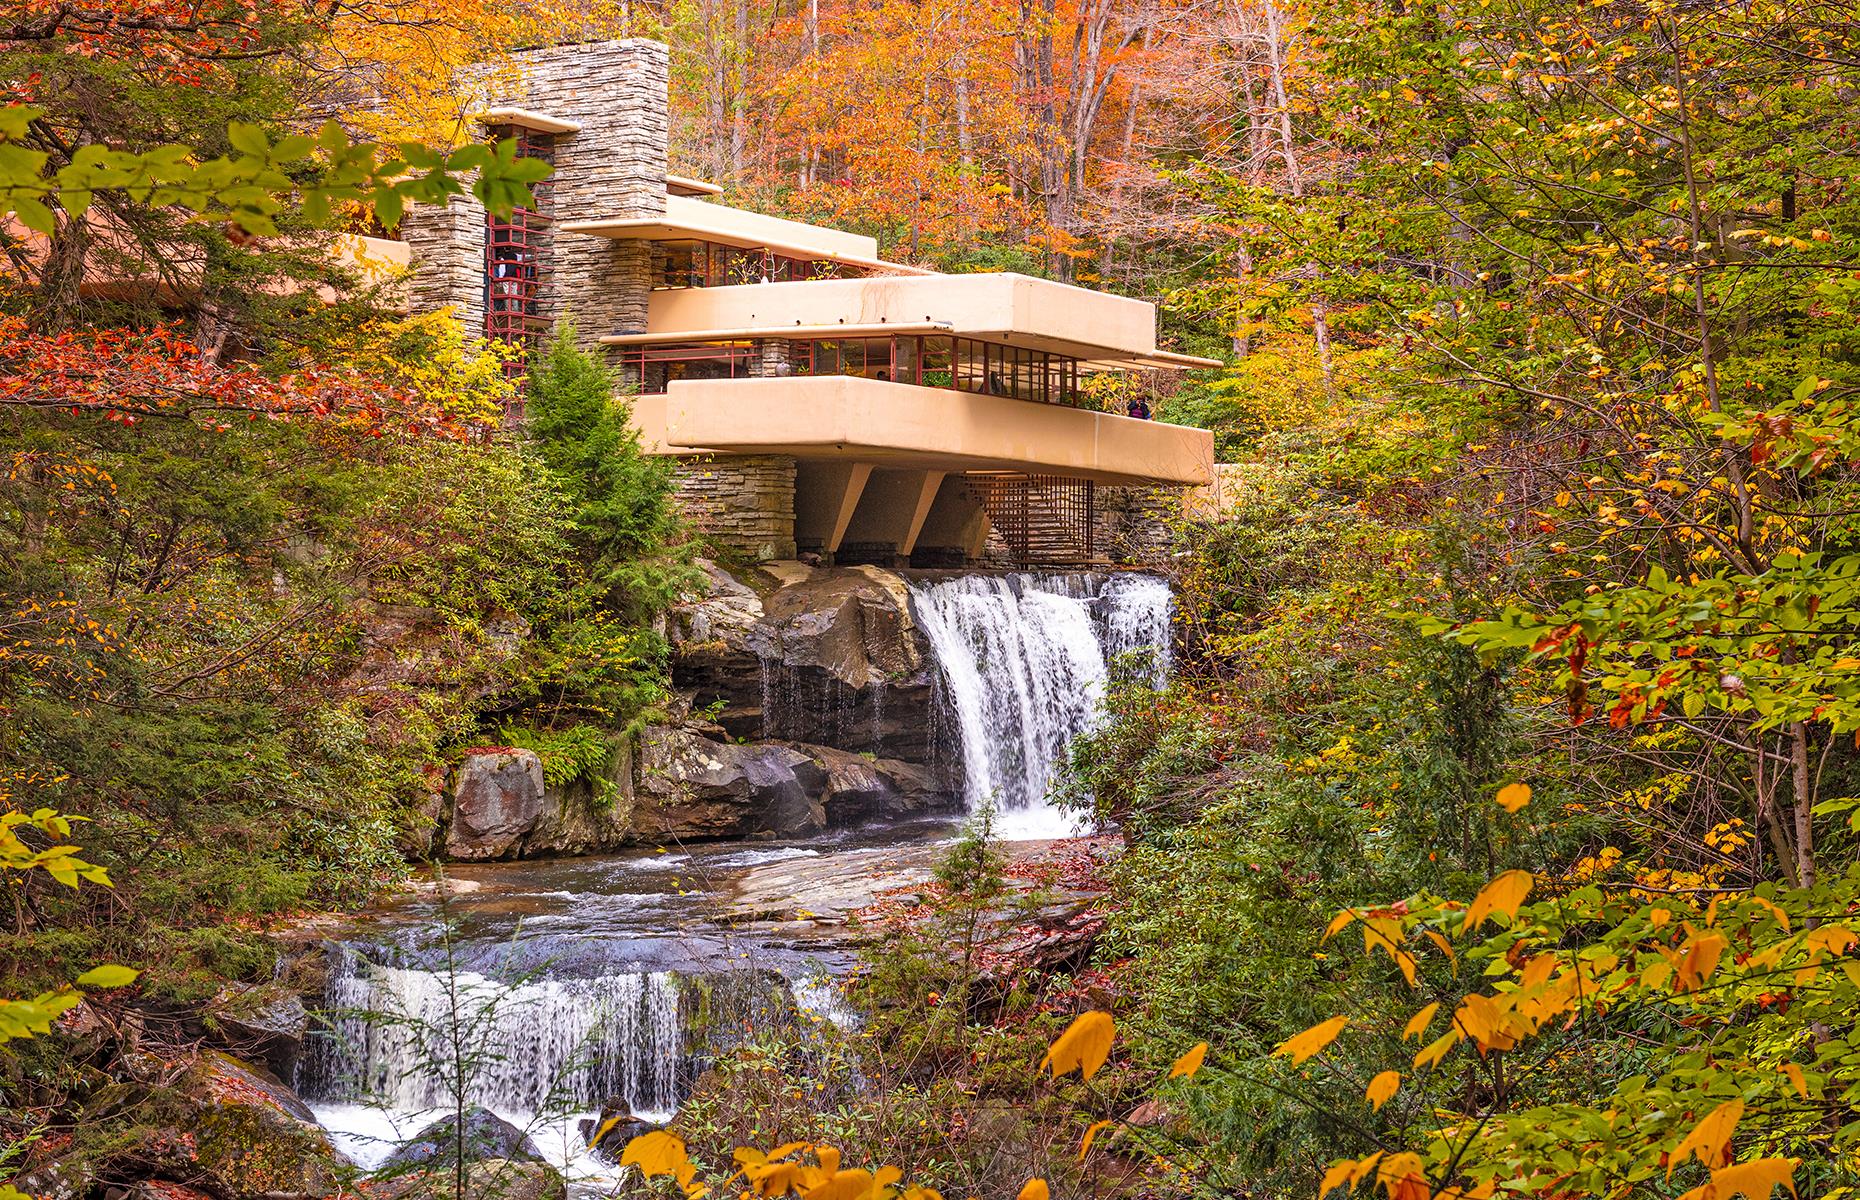 Hovering over cascading waterfalls, this multi-tiered house somehow blends in with its forest surroundings and brings the outside in with numerous terraces, walkways and wall-to-ceiling windows. Built in 1935, the house is often regarded as Frank Lloyd Wright's most accomplished design and is included in Smithsonian's list of 28 Places to See Before You Die. Both guided tours of the interior and self-guided tours of the grounds are available.